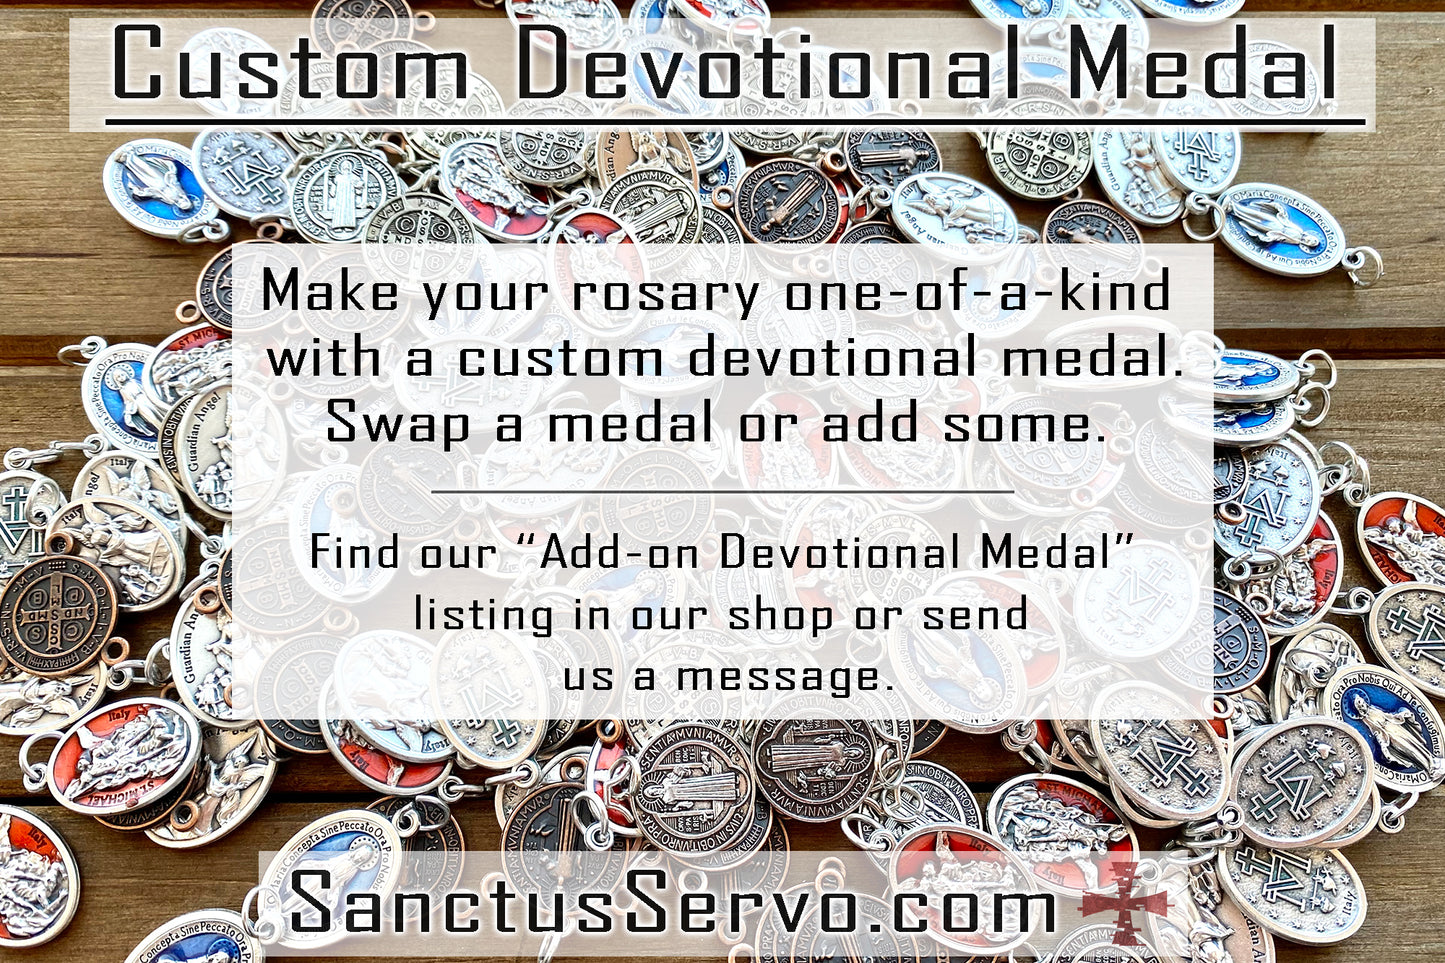 Elevate your rosary experience with our Add-on Devotional Medal - Catholic Patron Saint Medals, perfect for adding to your rosary. Choose from over 60 options and deepen your devotion to a particular saint or holy figure. Customize your rosary now! 